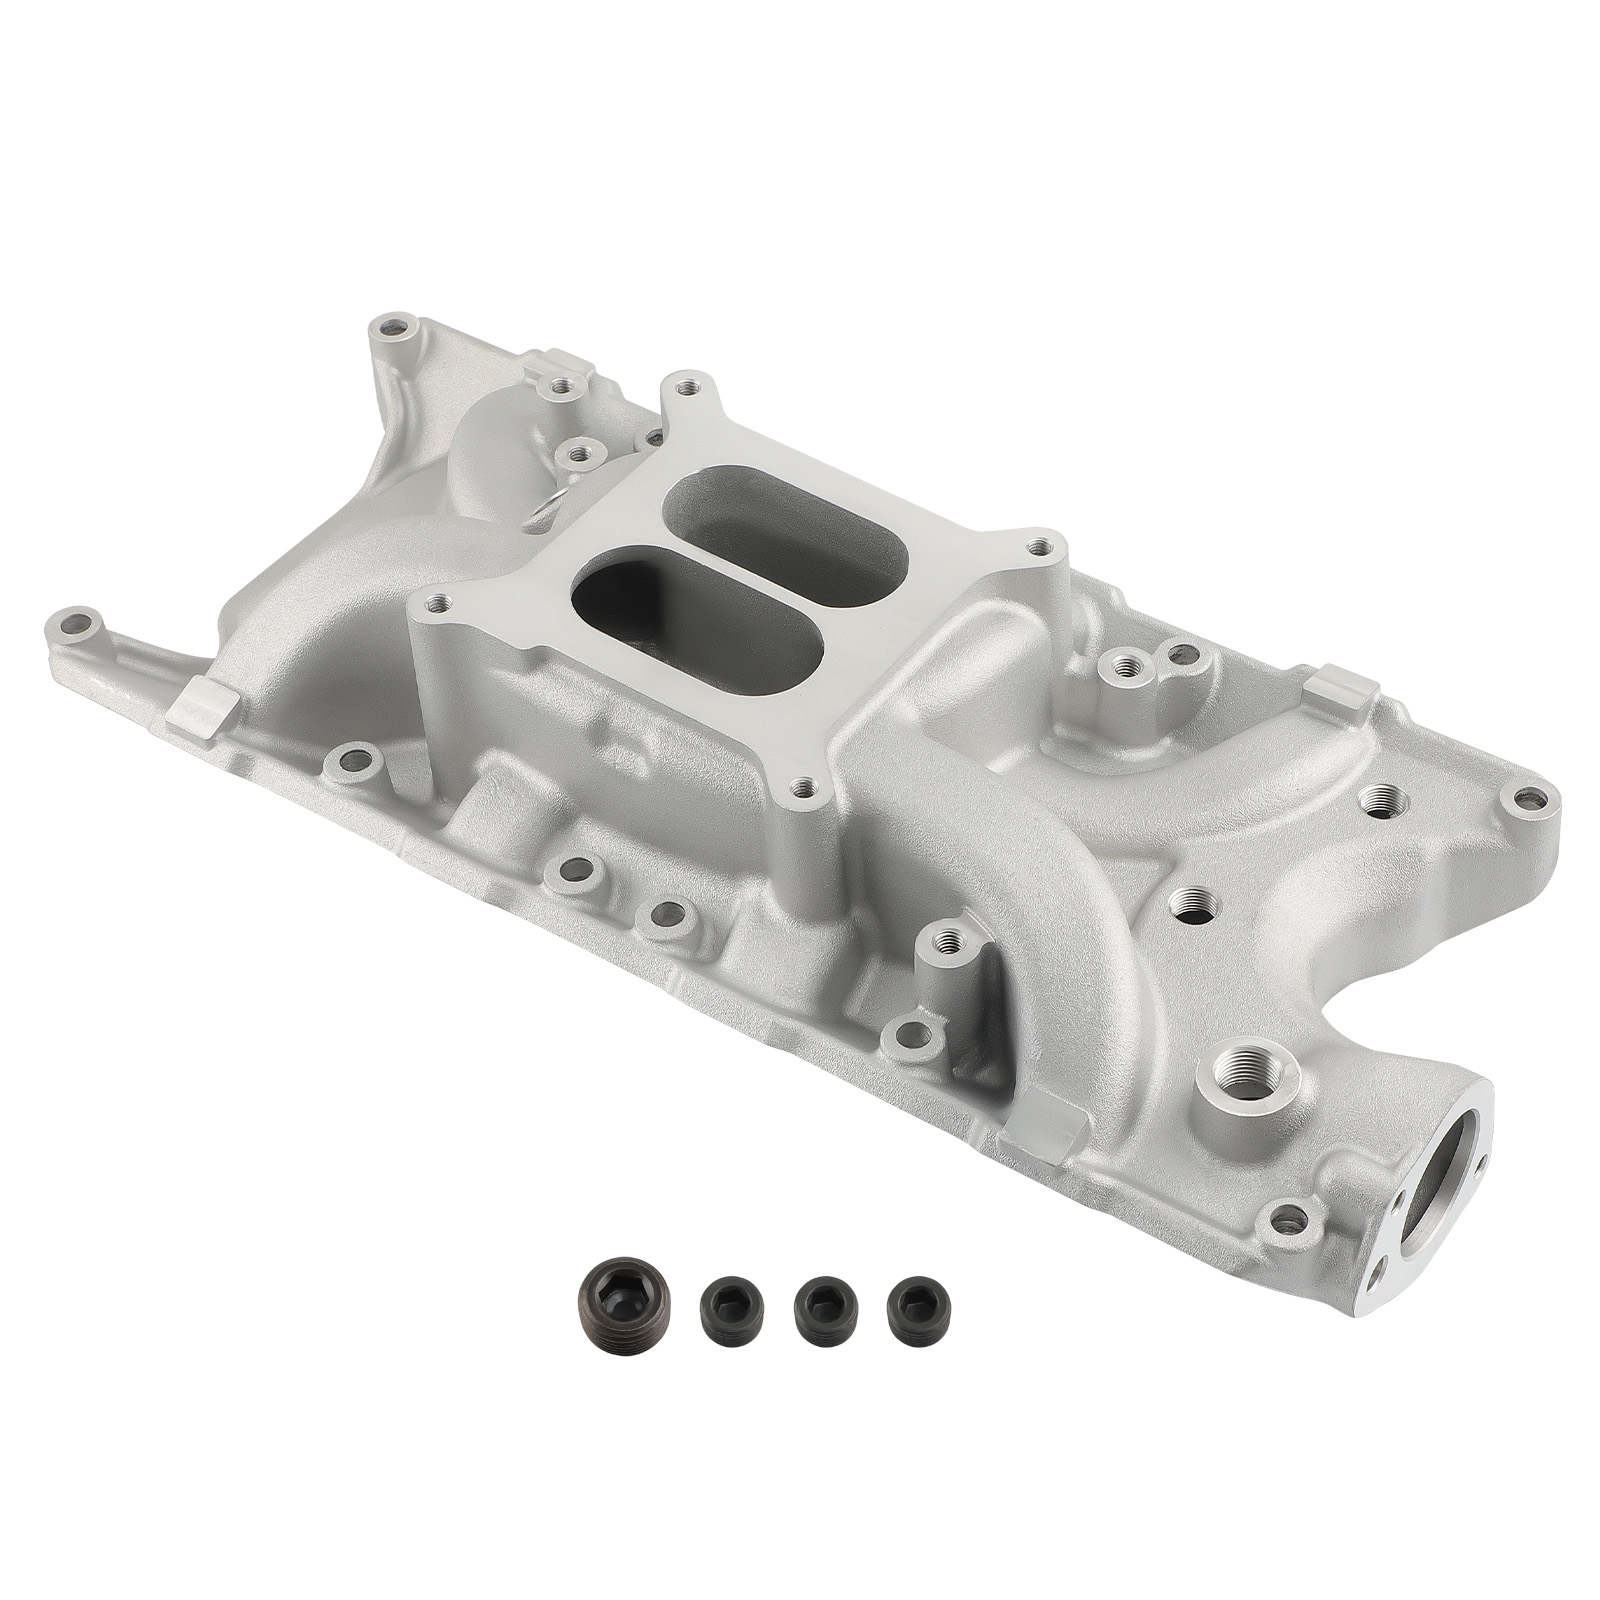 Engine Intake Manifold fit for Ford Small Block 289 302 High Rise Dual Plane